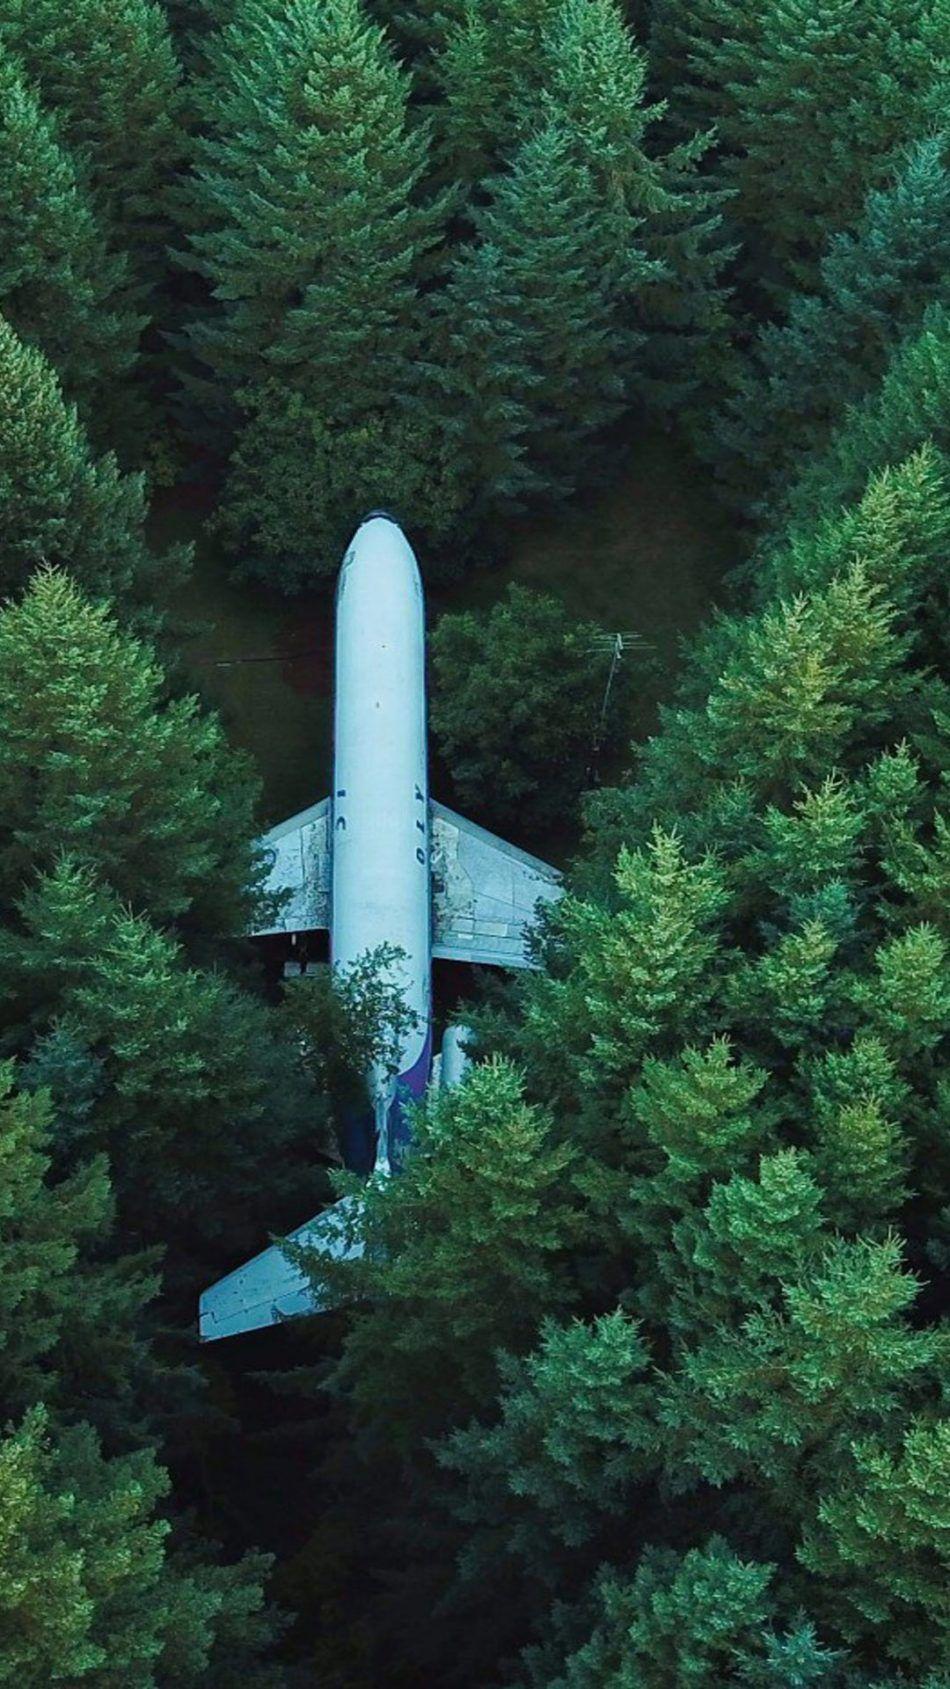 Plane Aircraft Forest Surrounded. Forest wallpaper iphone, Nature